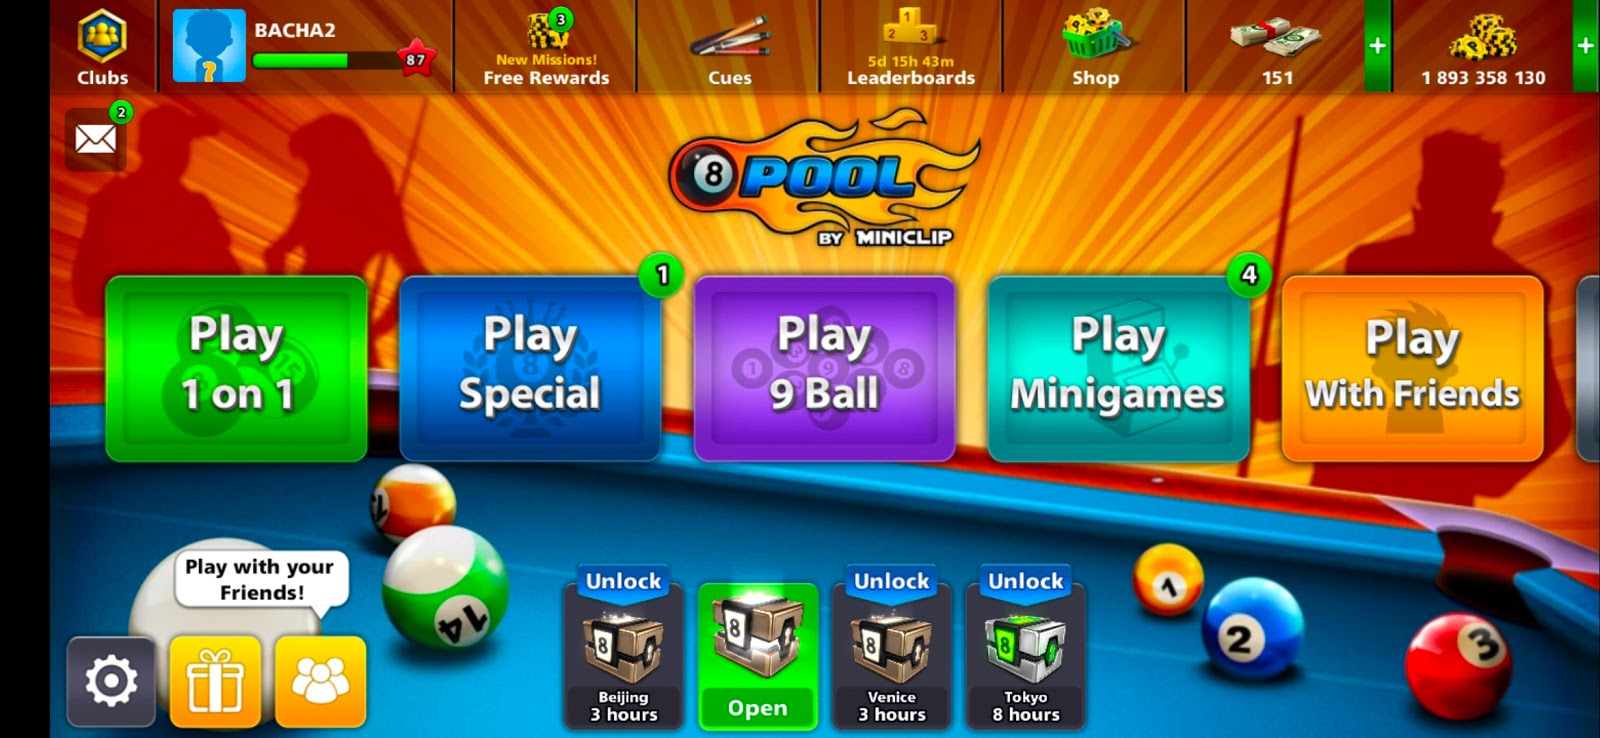 8 Ball Pool Free 4 Billion Coins Account Giveaway